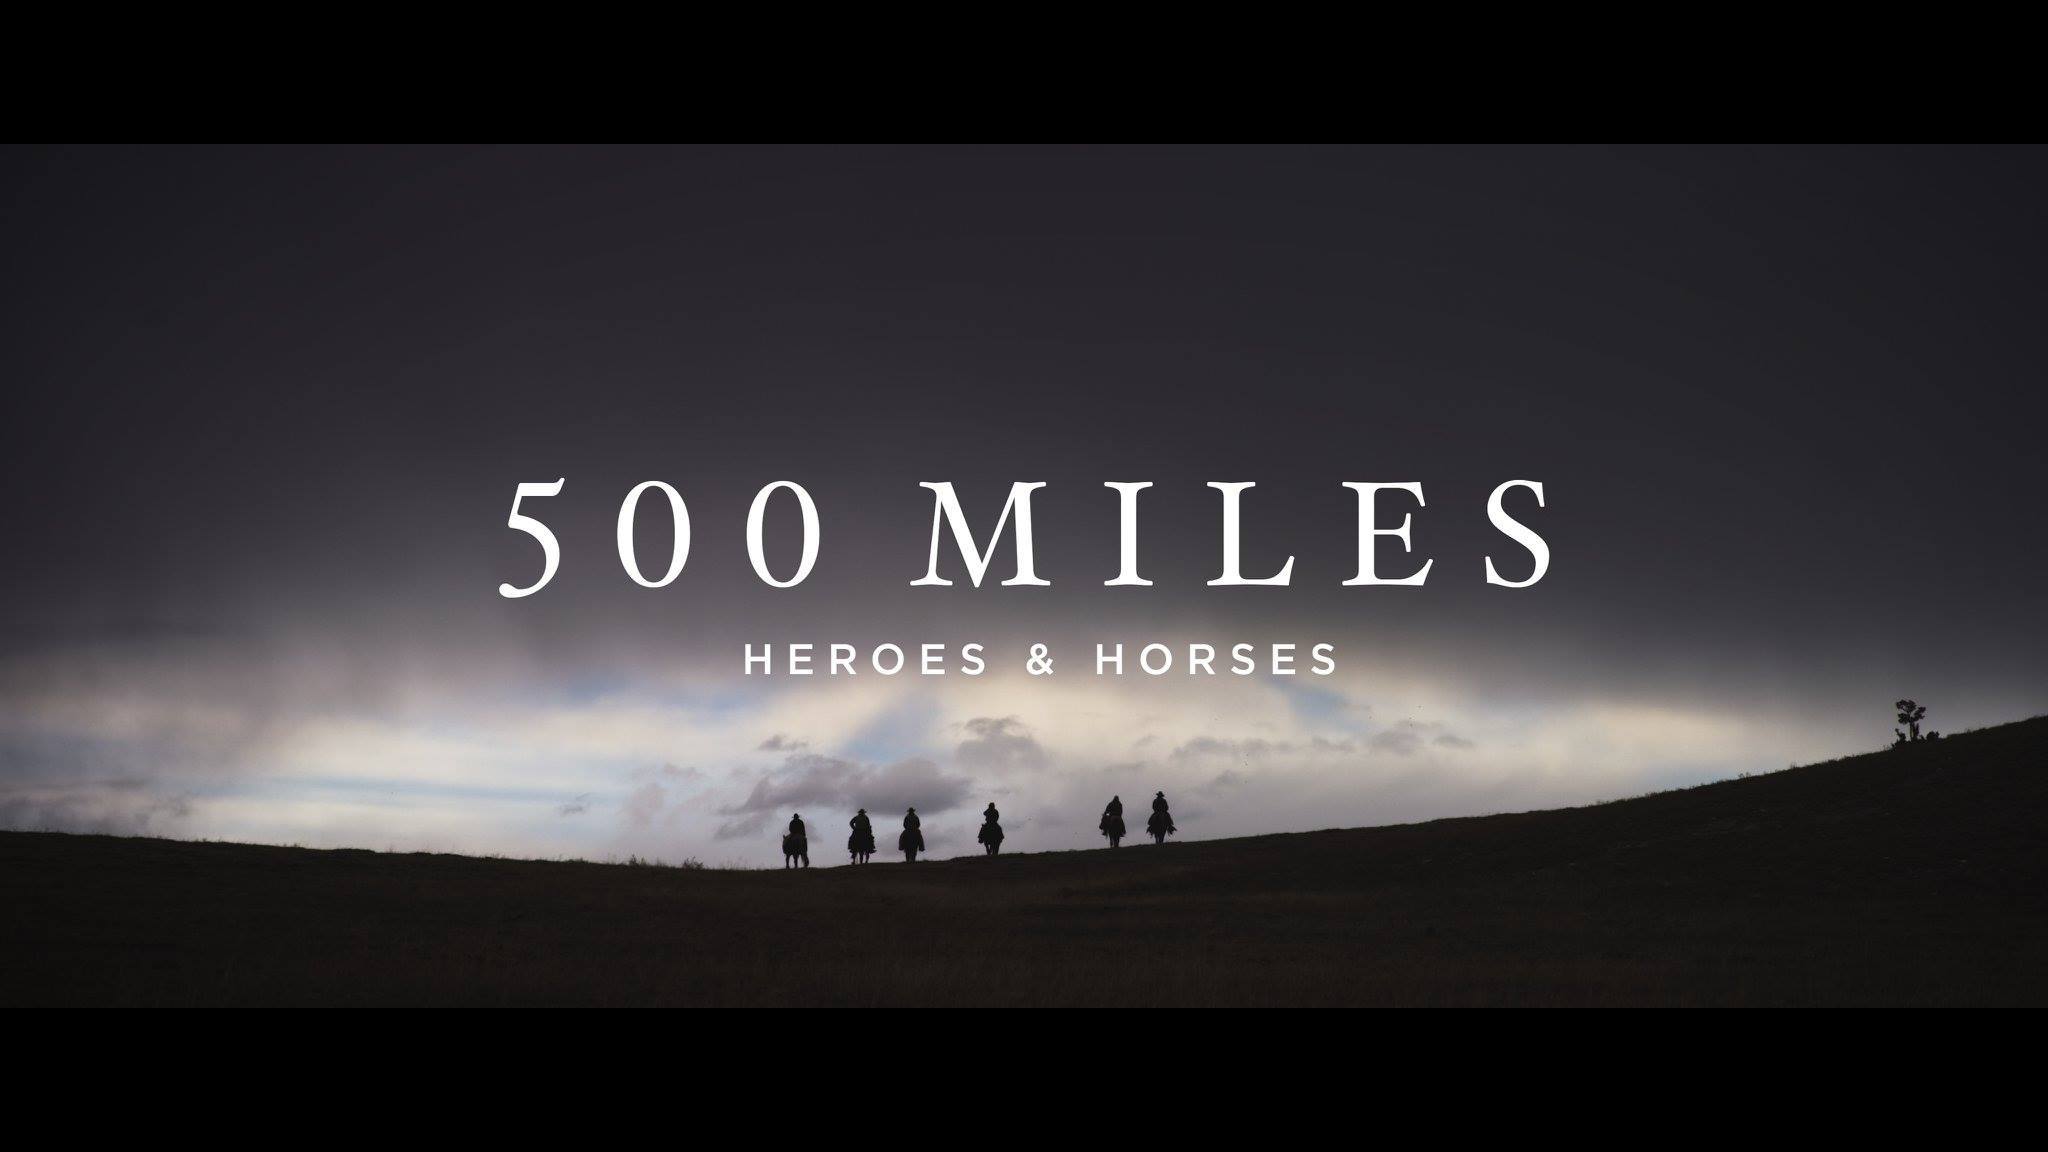 We have so many exciting things to share with all of you as we lead up to the release of 500 Miles on November 10th. Our hope with all of this? That it starts a conversation. A real conversation about why organizations like Heroes and Horses need to exist, and why all of us – whether you are a veteran or not – have a responsibility to question our relationship with challenge and purpose.